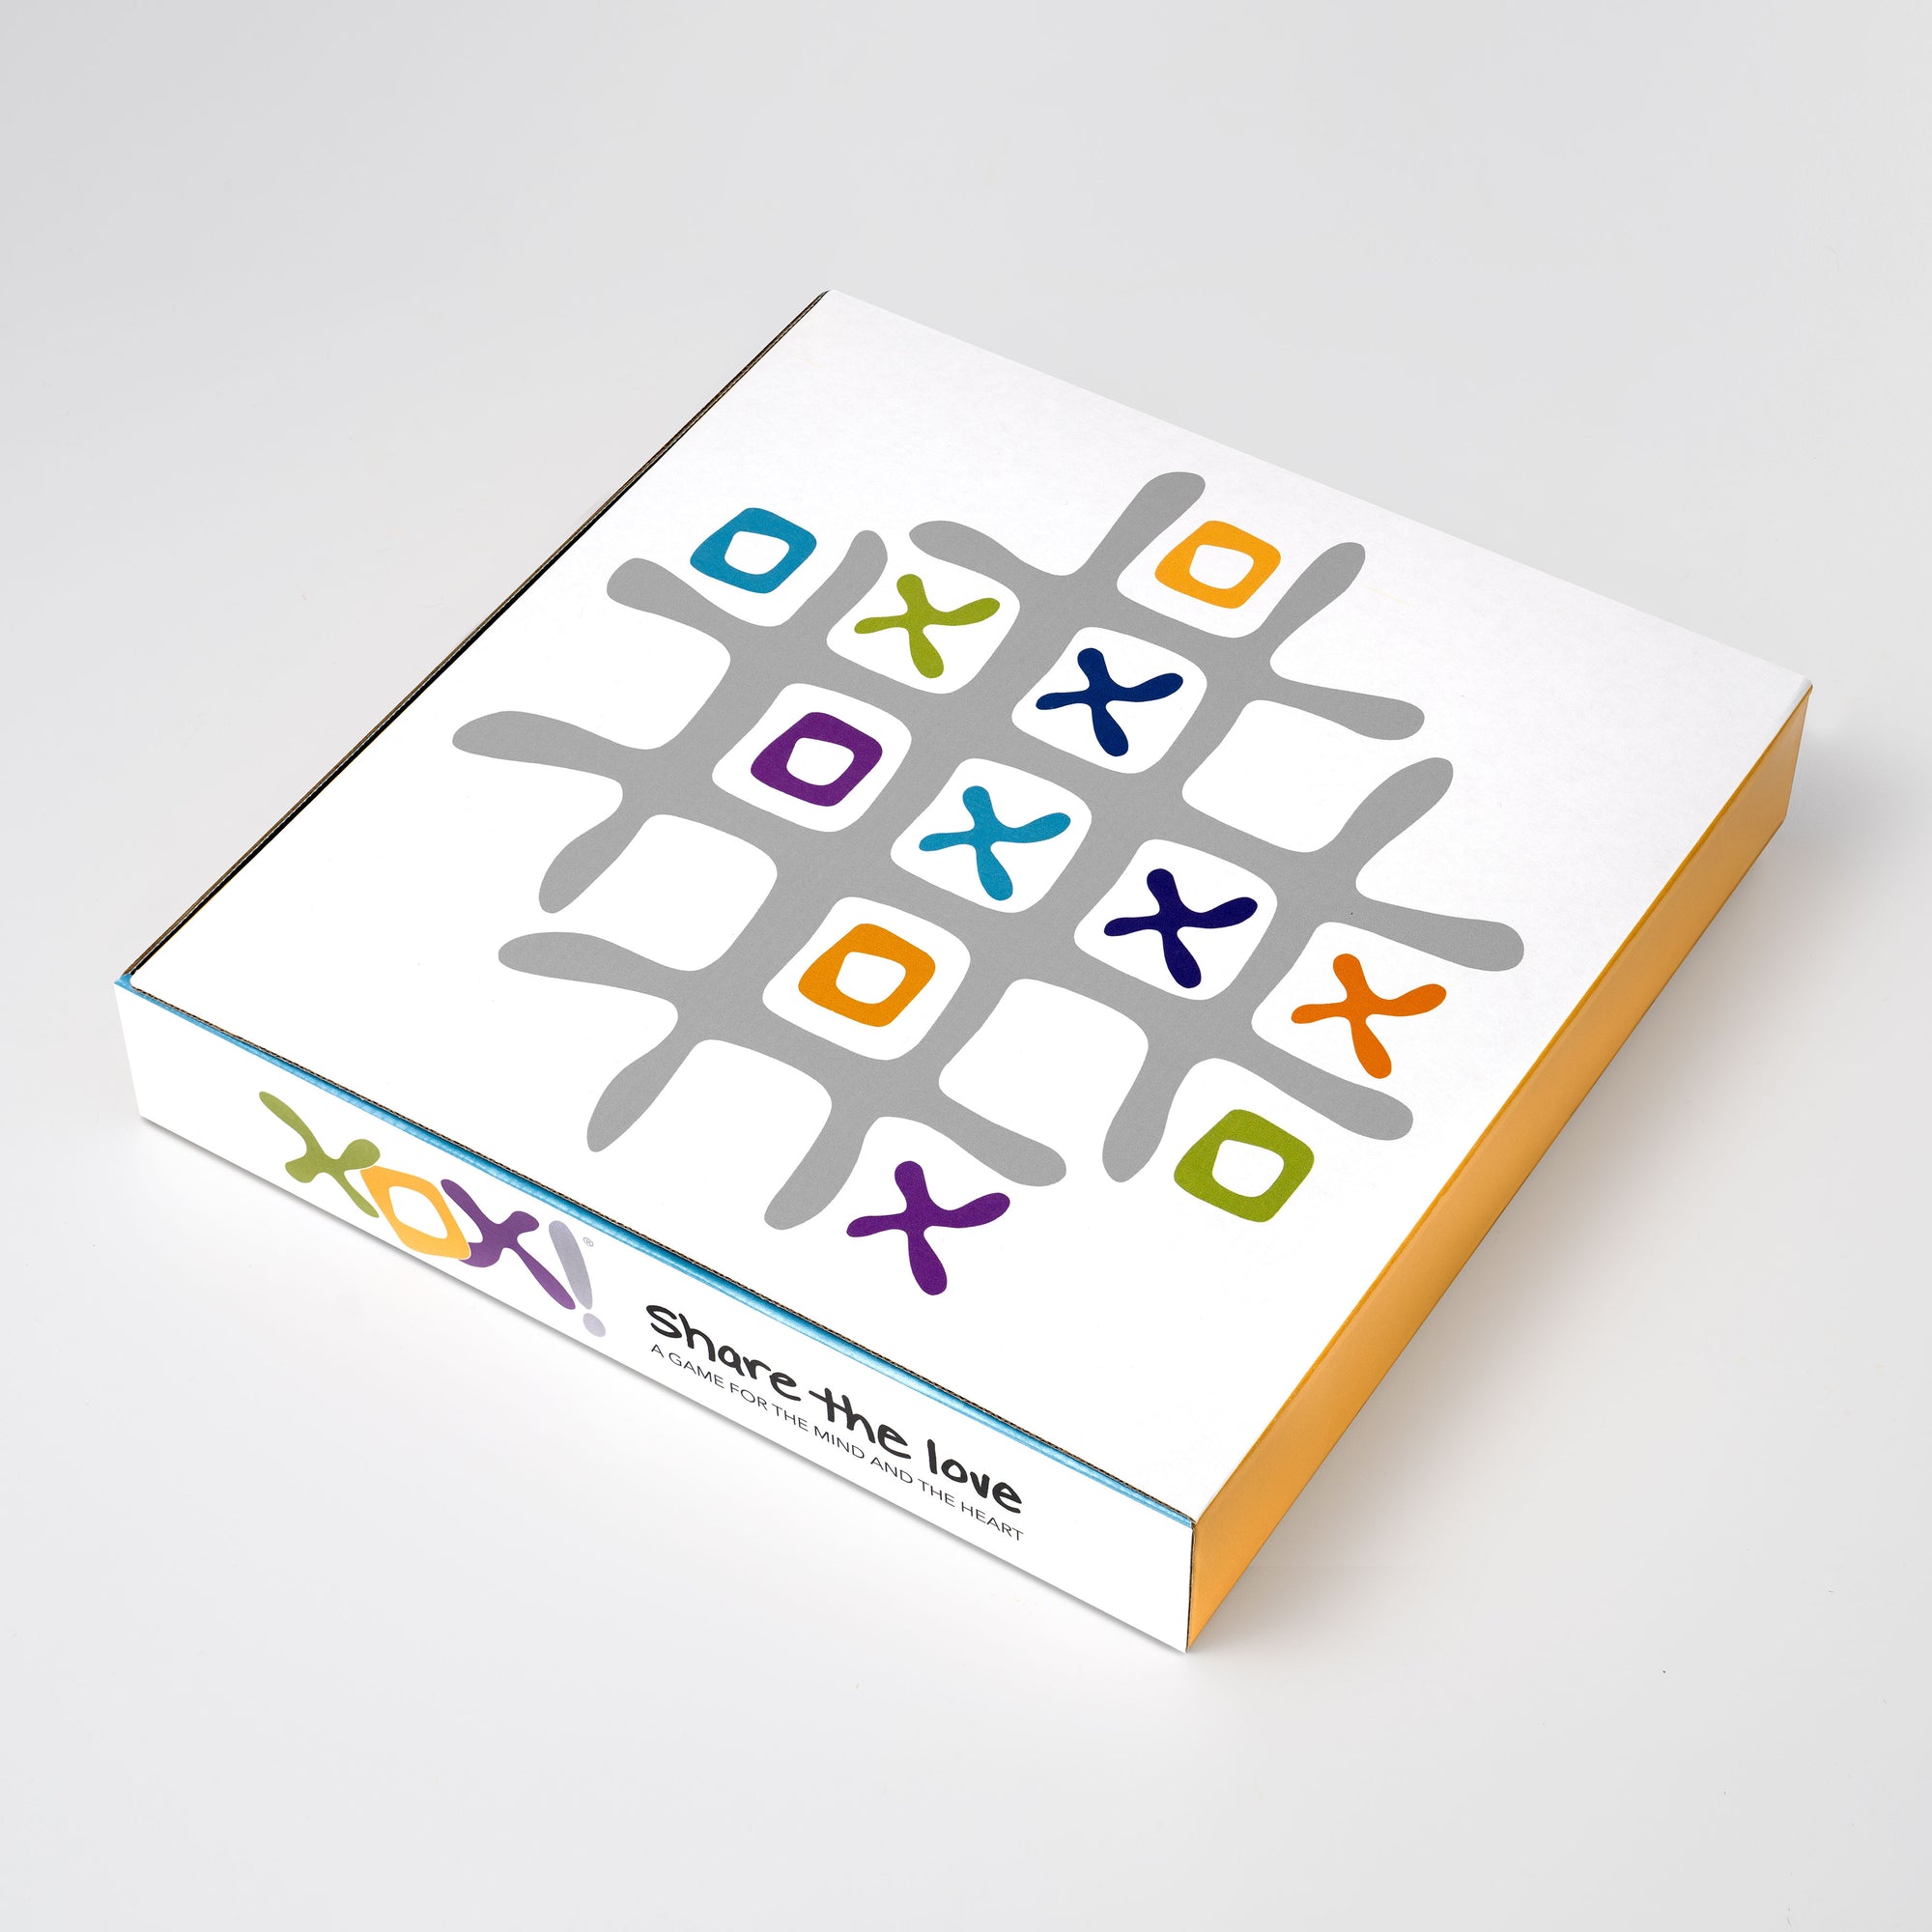 XOX! Share the Love. The fun, sophisticated luxury board game that doubles as art.